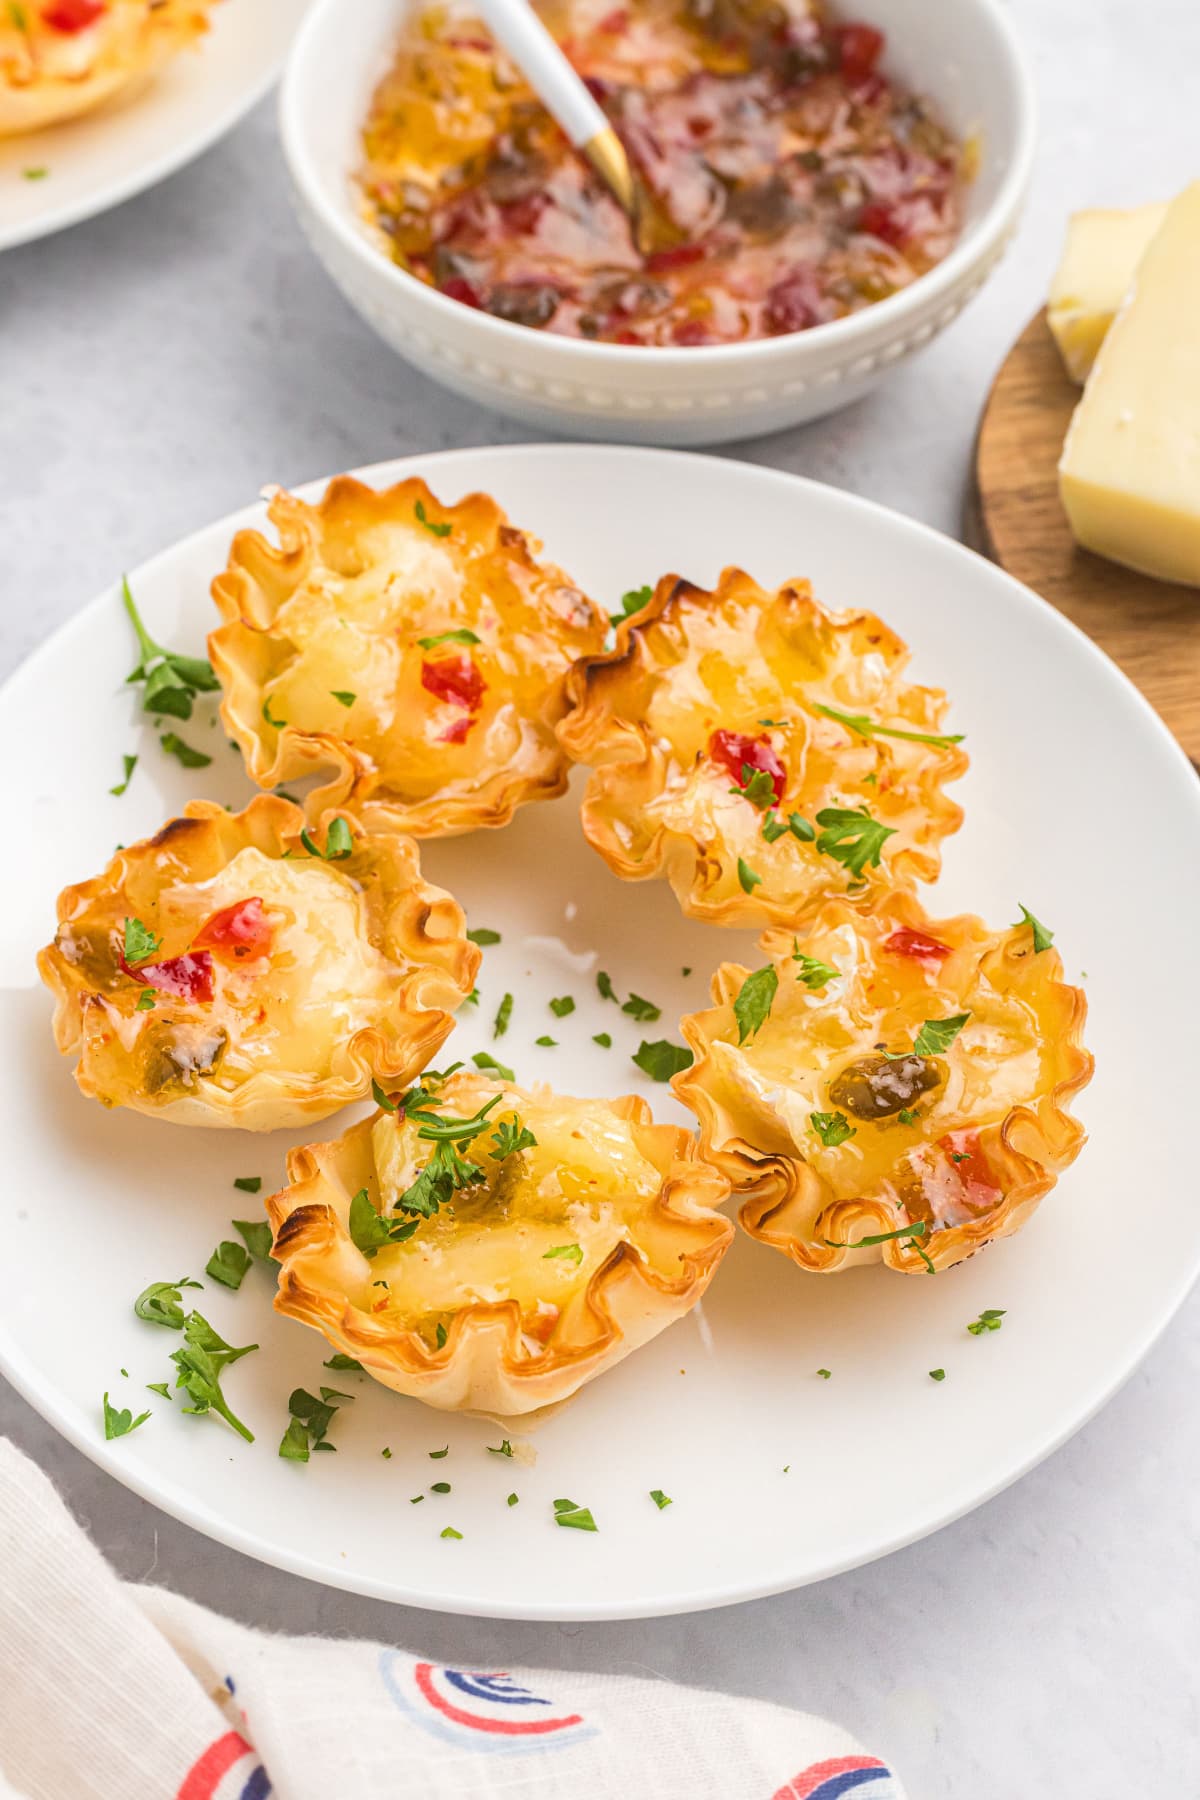 5 hot brie kisses appetizers on a plate